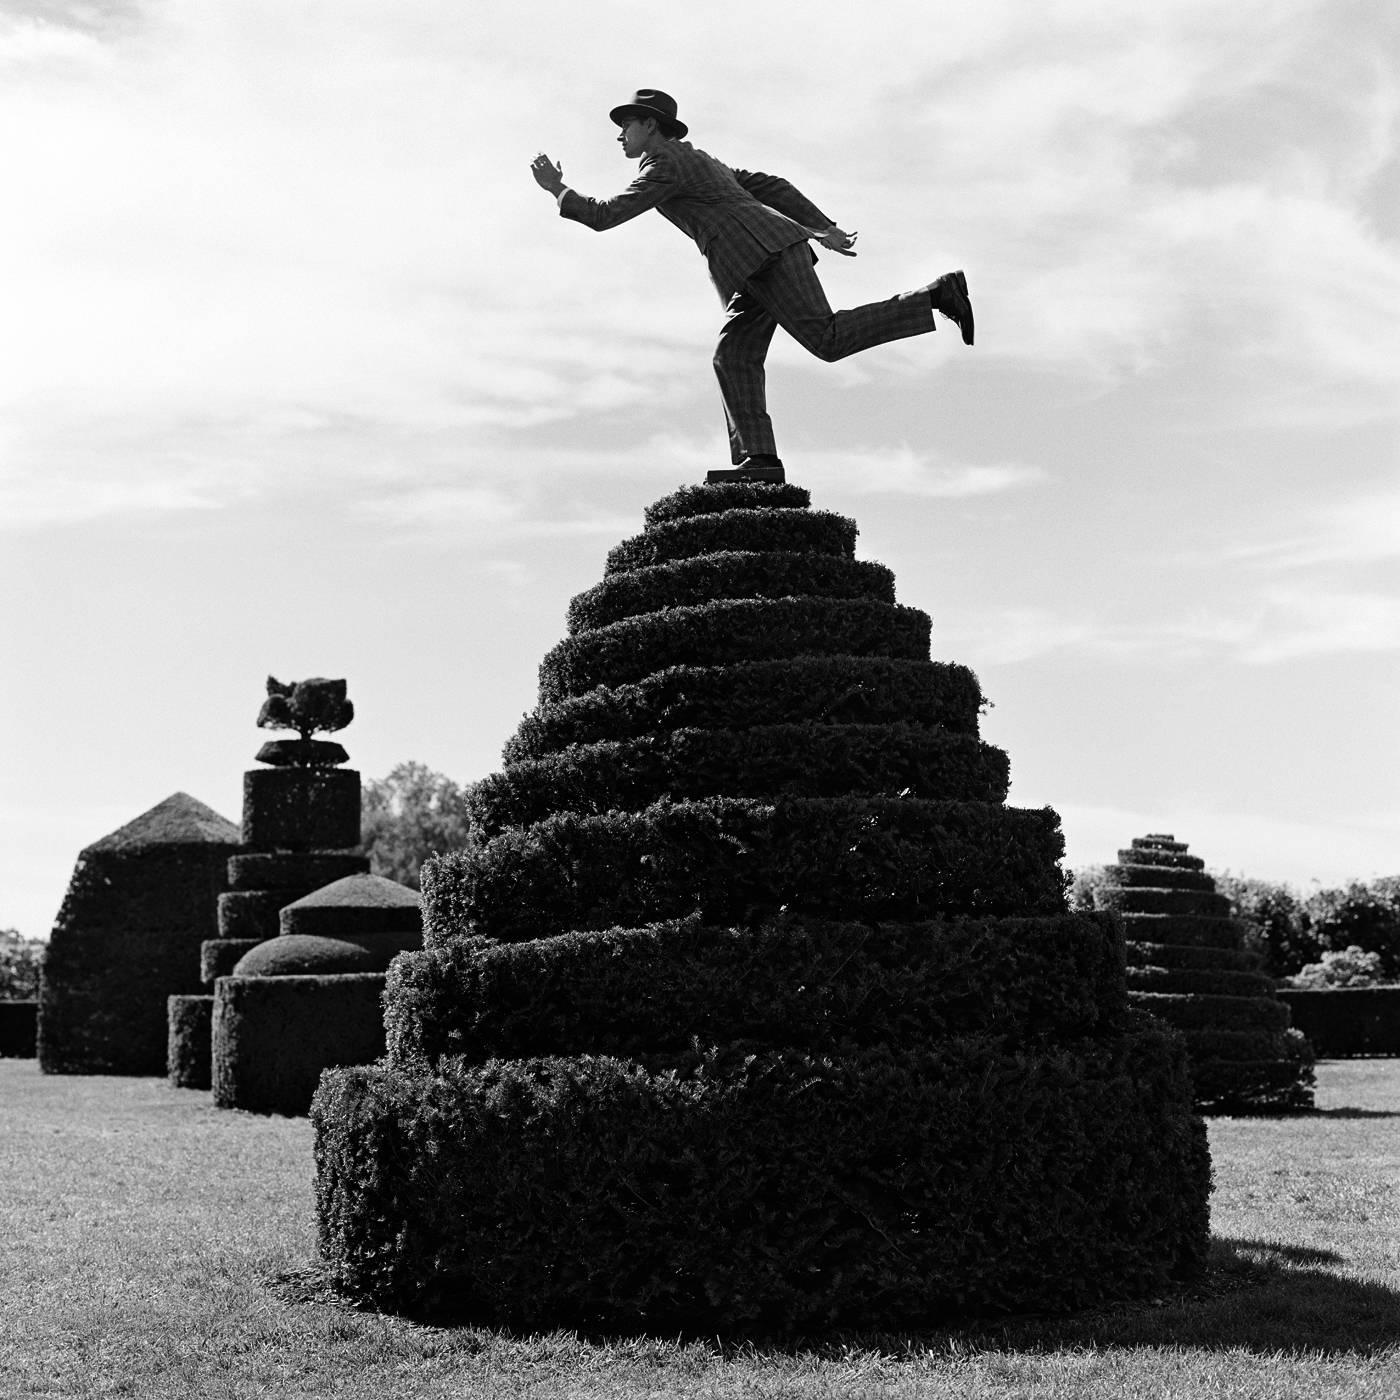 Rodney Smith Figurative Photograph - Reed Balancing on top of Topiary, Longwood Gardens, PA